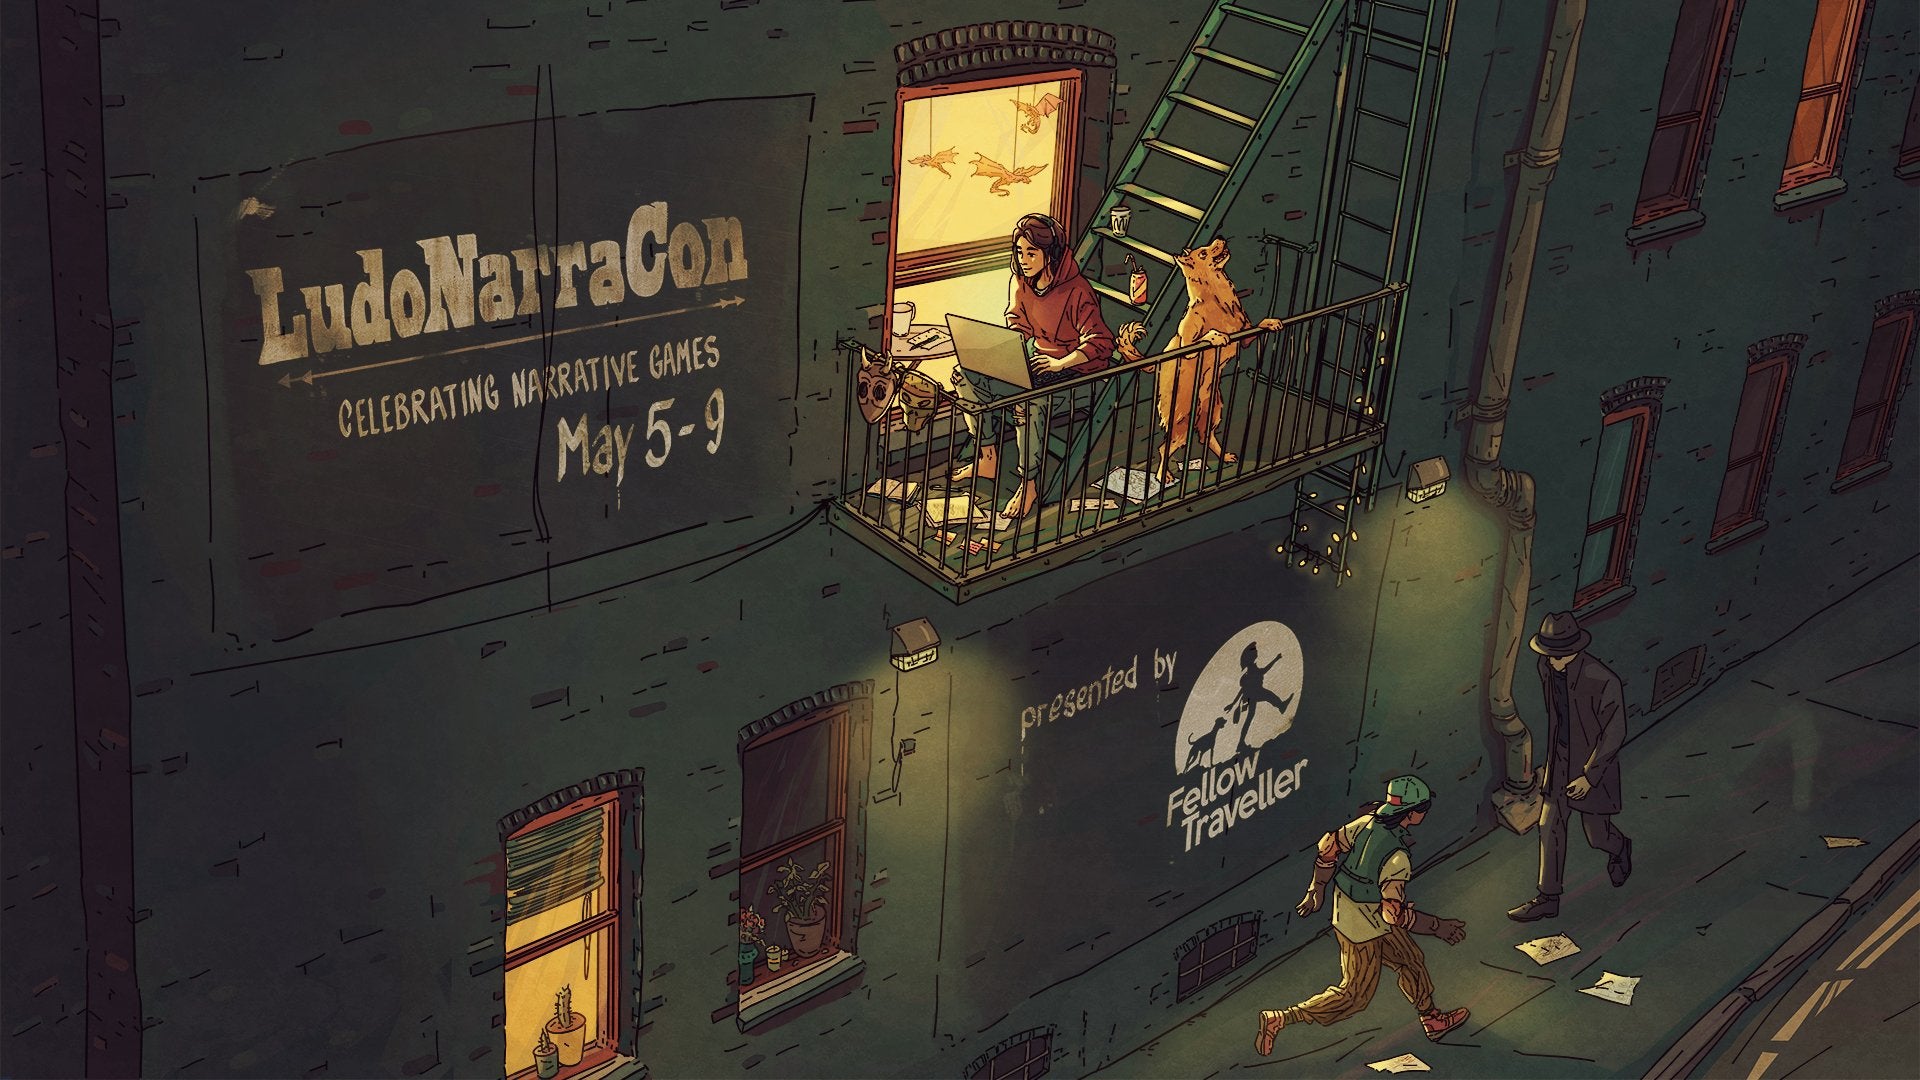 Image for Narrative-driven game festival, LudoNarraCon, is back next week